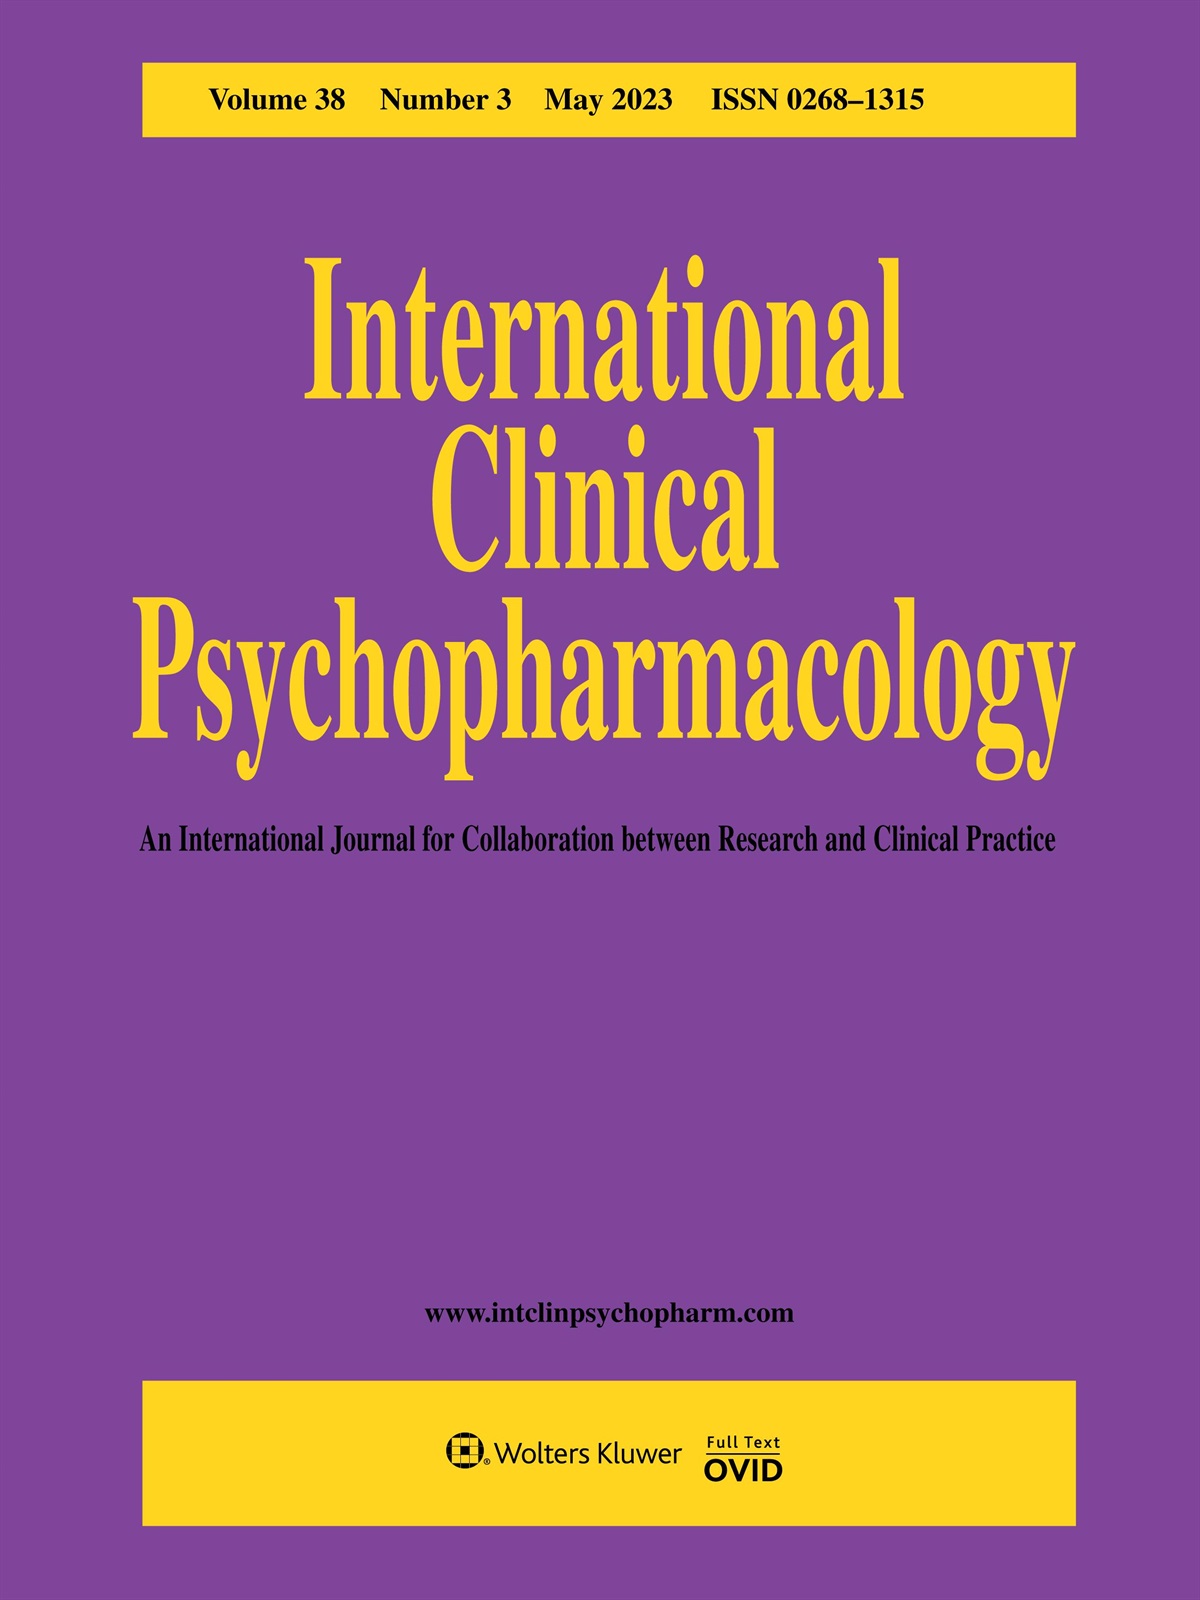 Interplay of environmental and clinical factors in psychiatric disorders